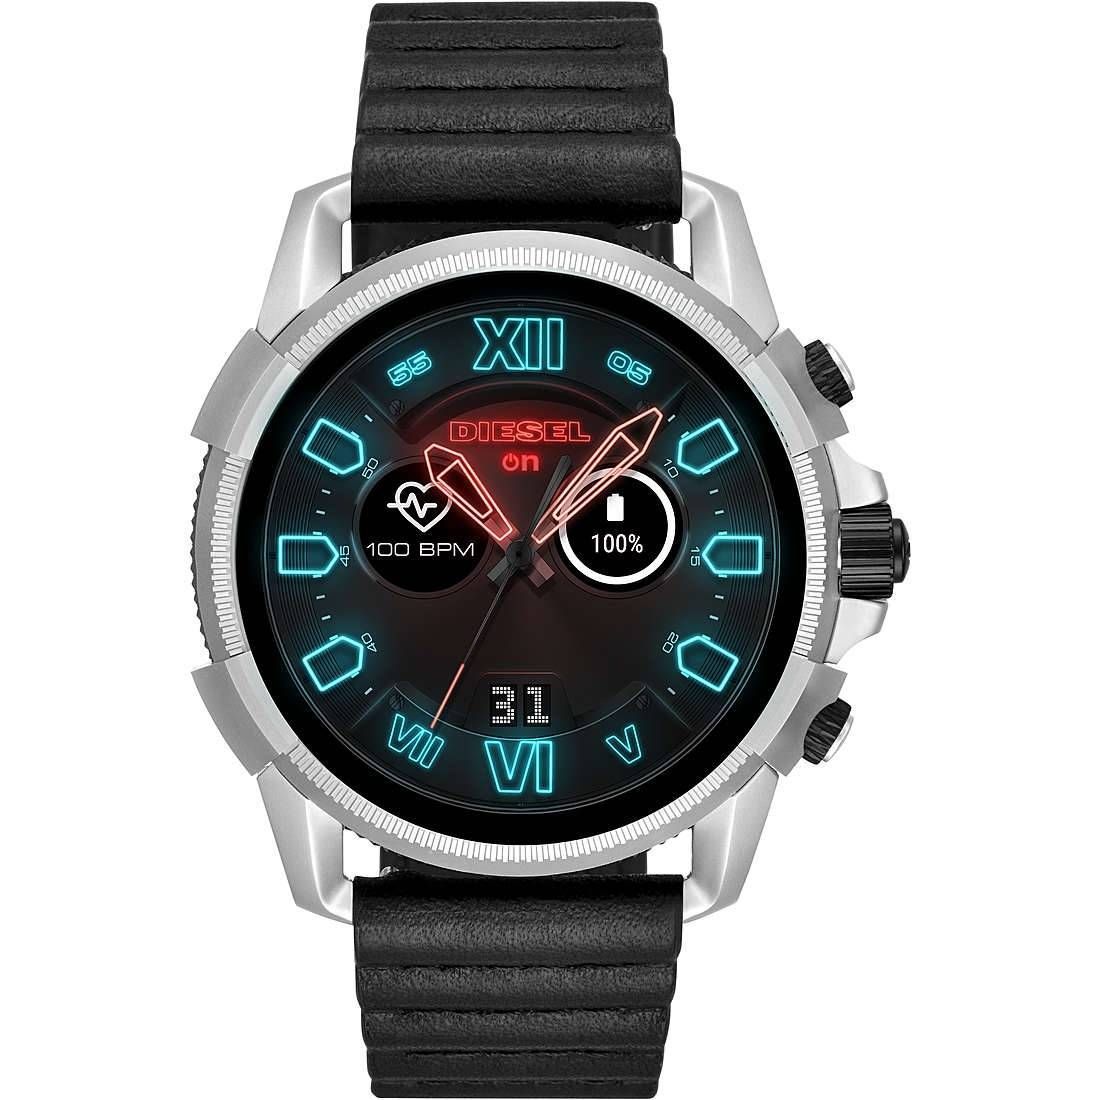 DIESEL On Full Guard Touchscreen Smartwatch Black Leather Strap DT2010